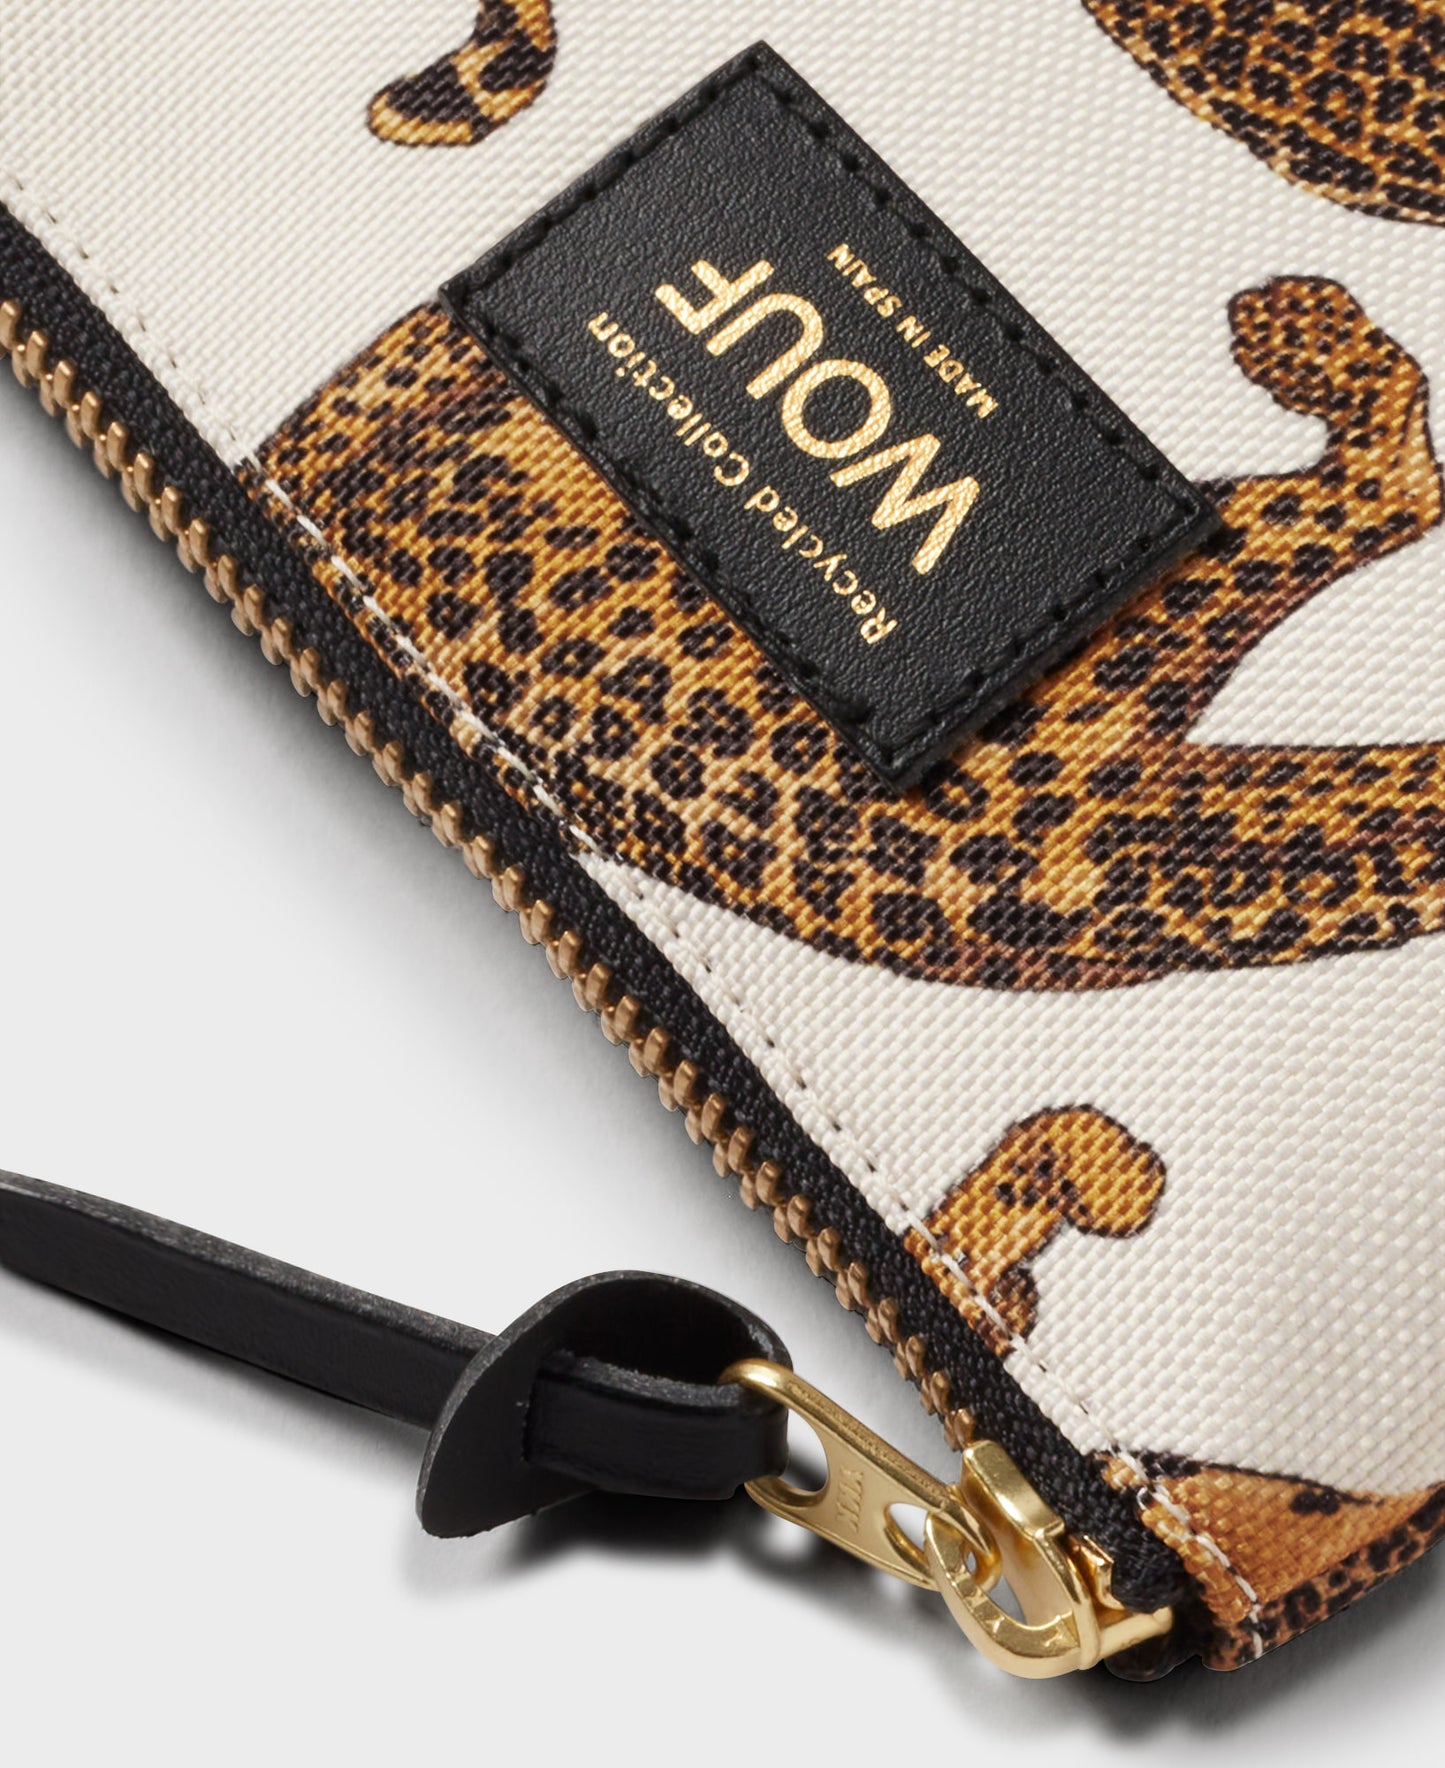 The Leopard Small Pouch